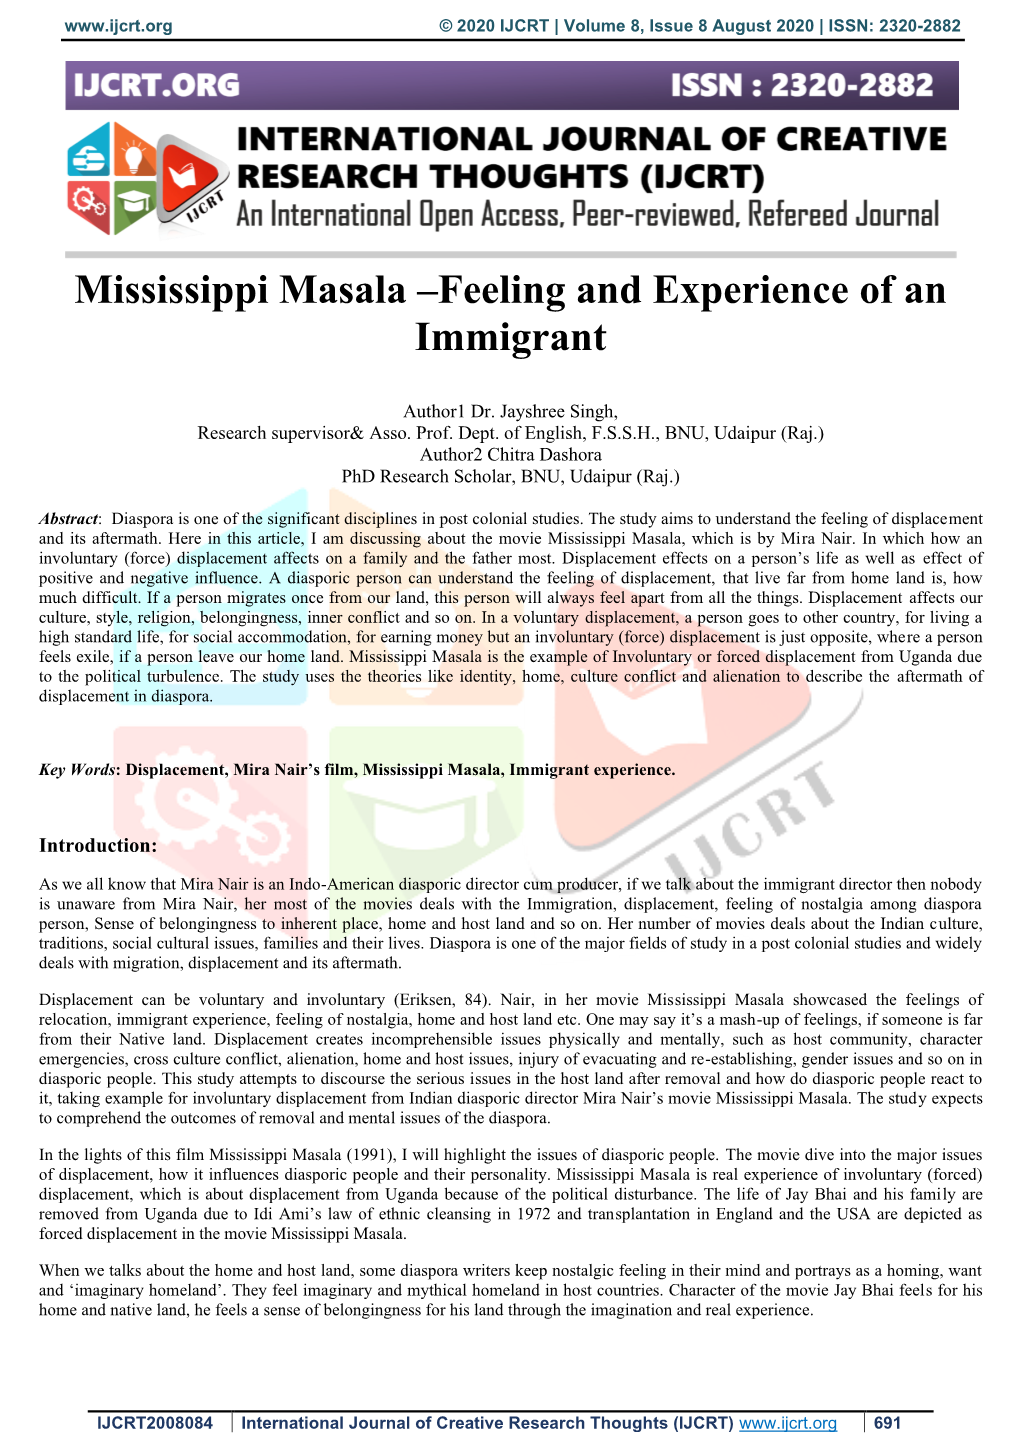 Mississippi Masala –Feeling and Experience of an Immigrant